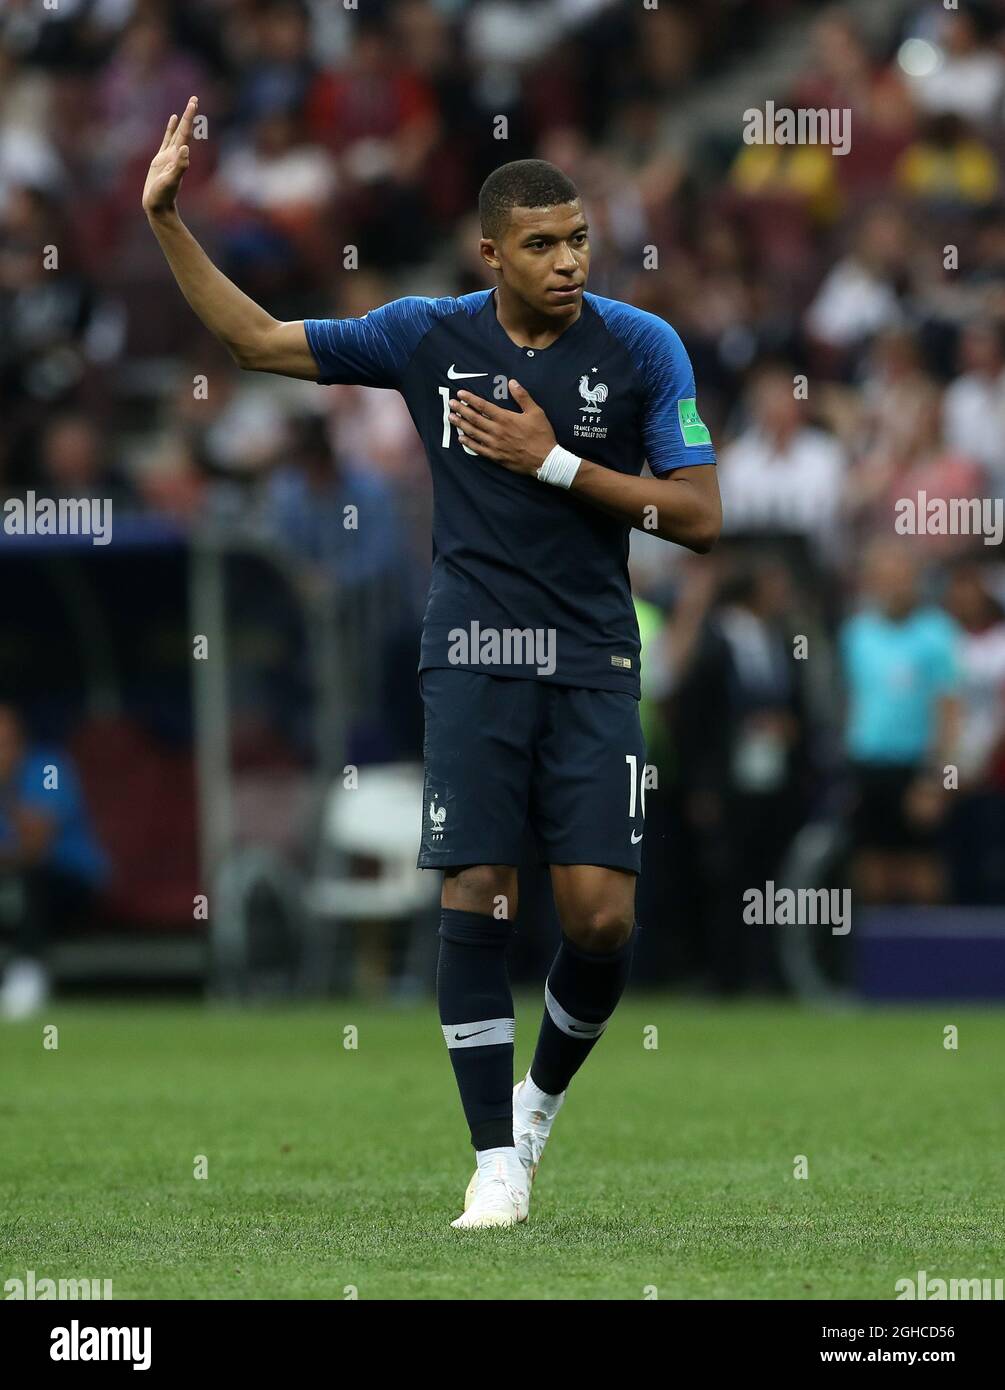 France's Kylian Mbappe in action during the FIFA World Cup 2018 Final at the Luzhniki Stadium, Moscow. Picture date 15th July 2018. Picture credit should read: David Klein/Sportimage via PA Images Stock Photo